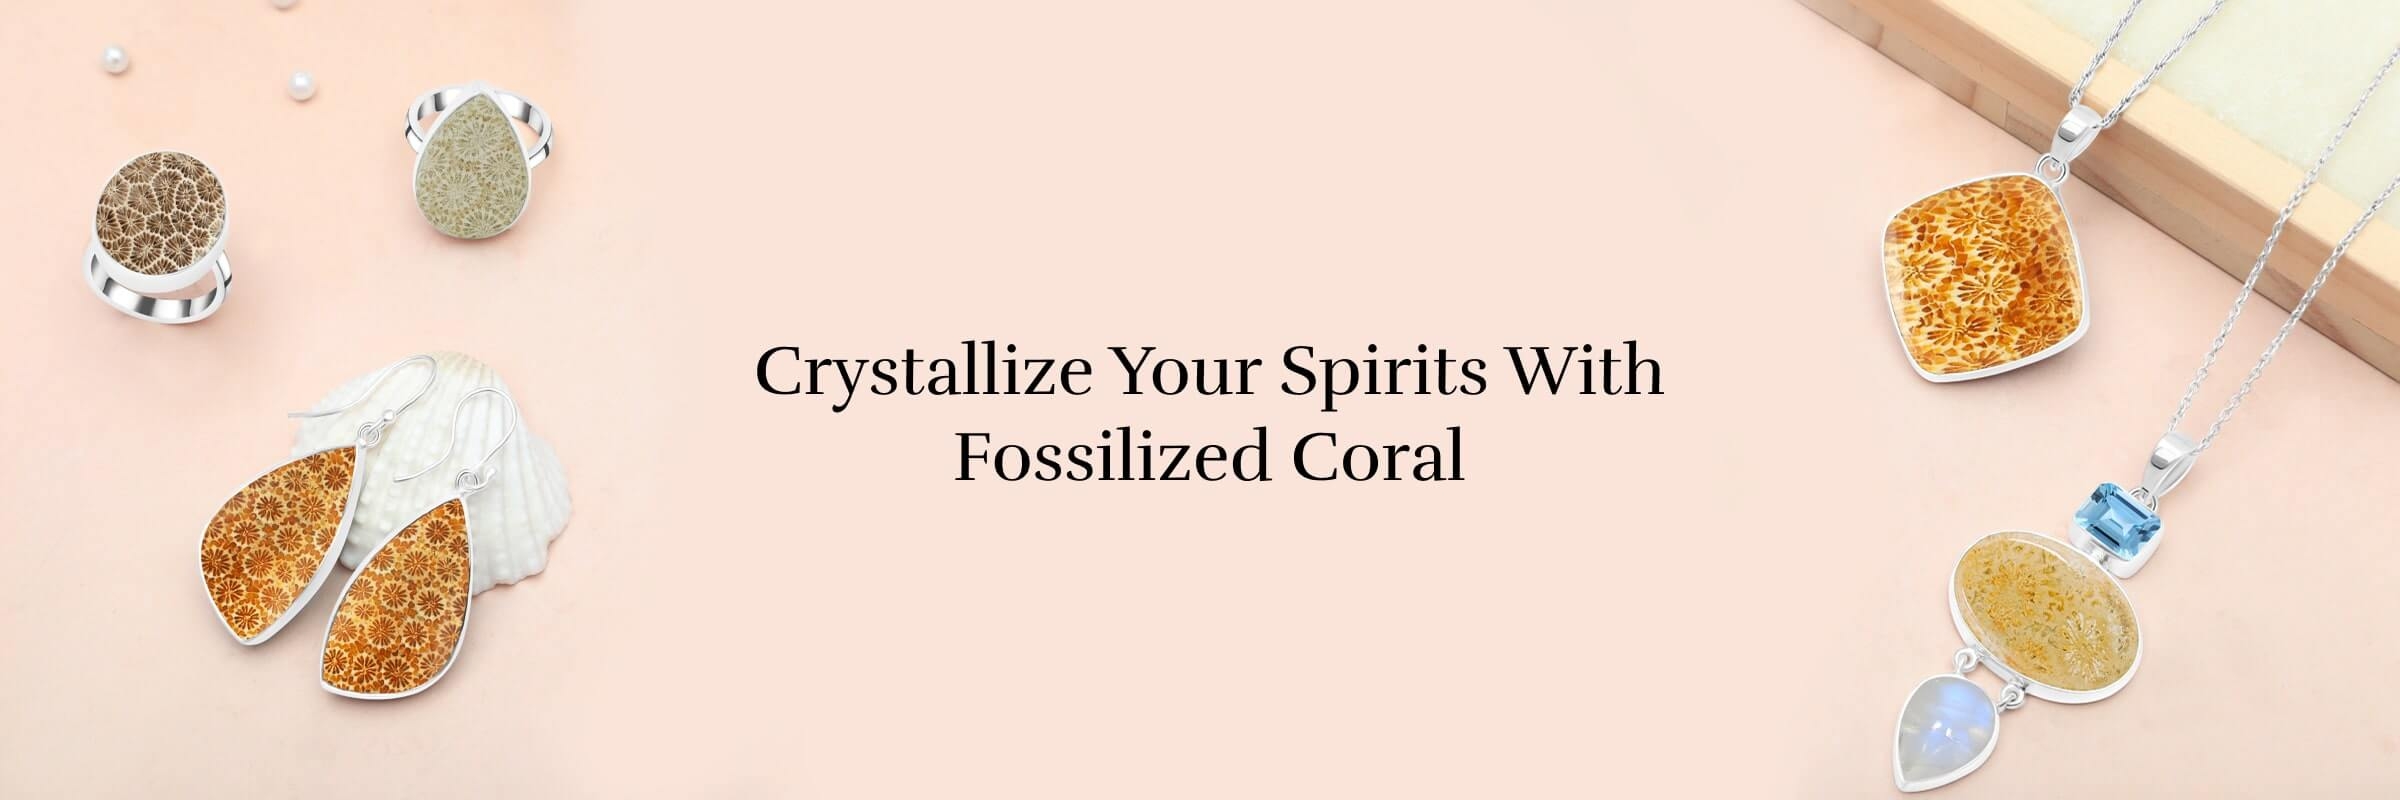 Regenerate Your Aura With Fossilized Coral Necklaces